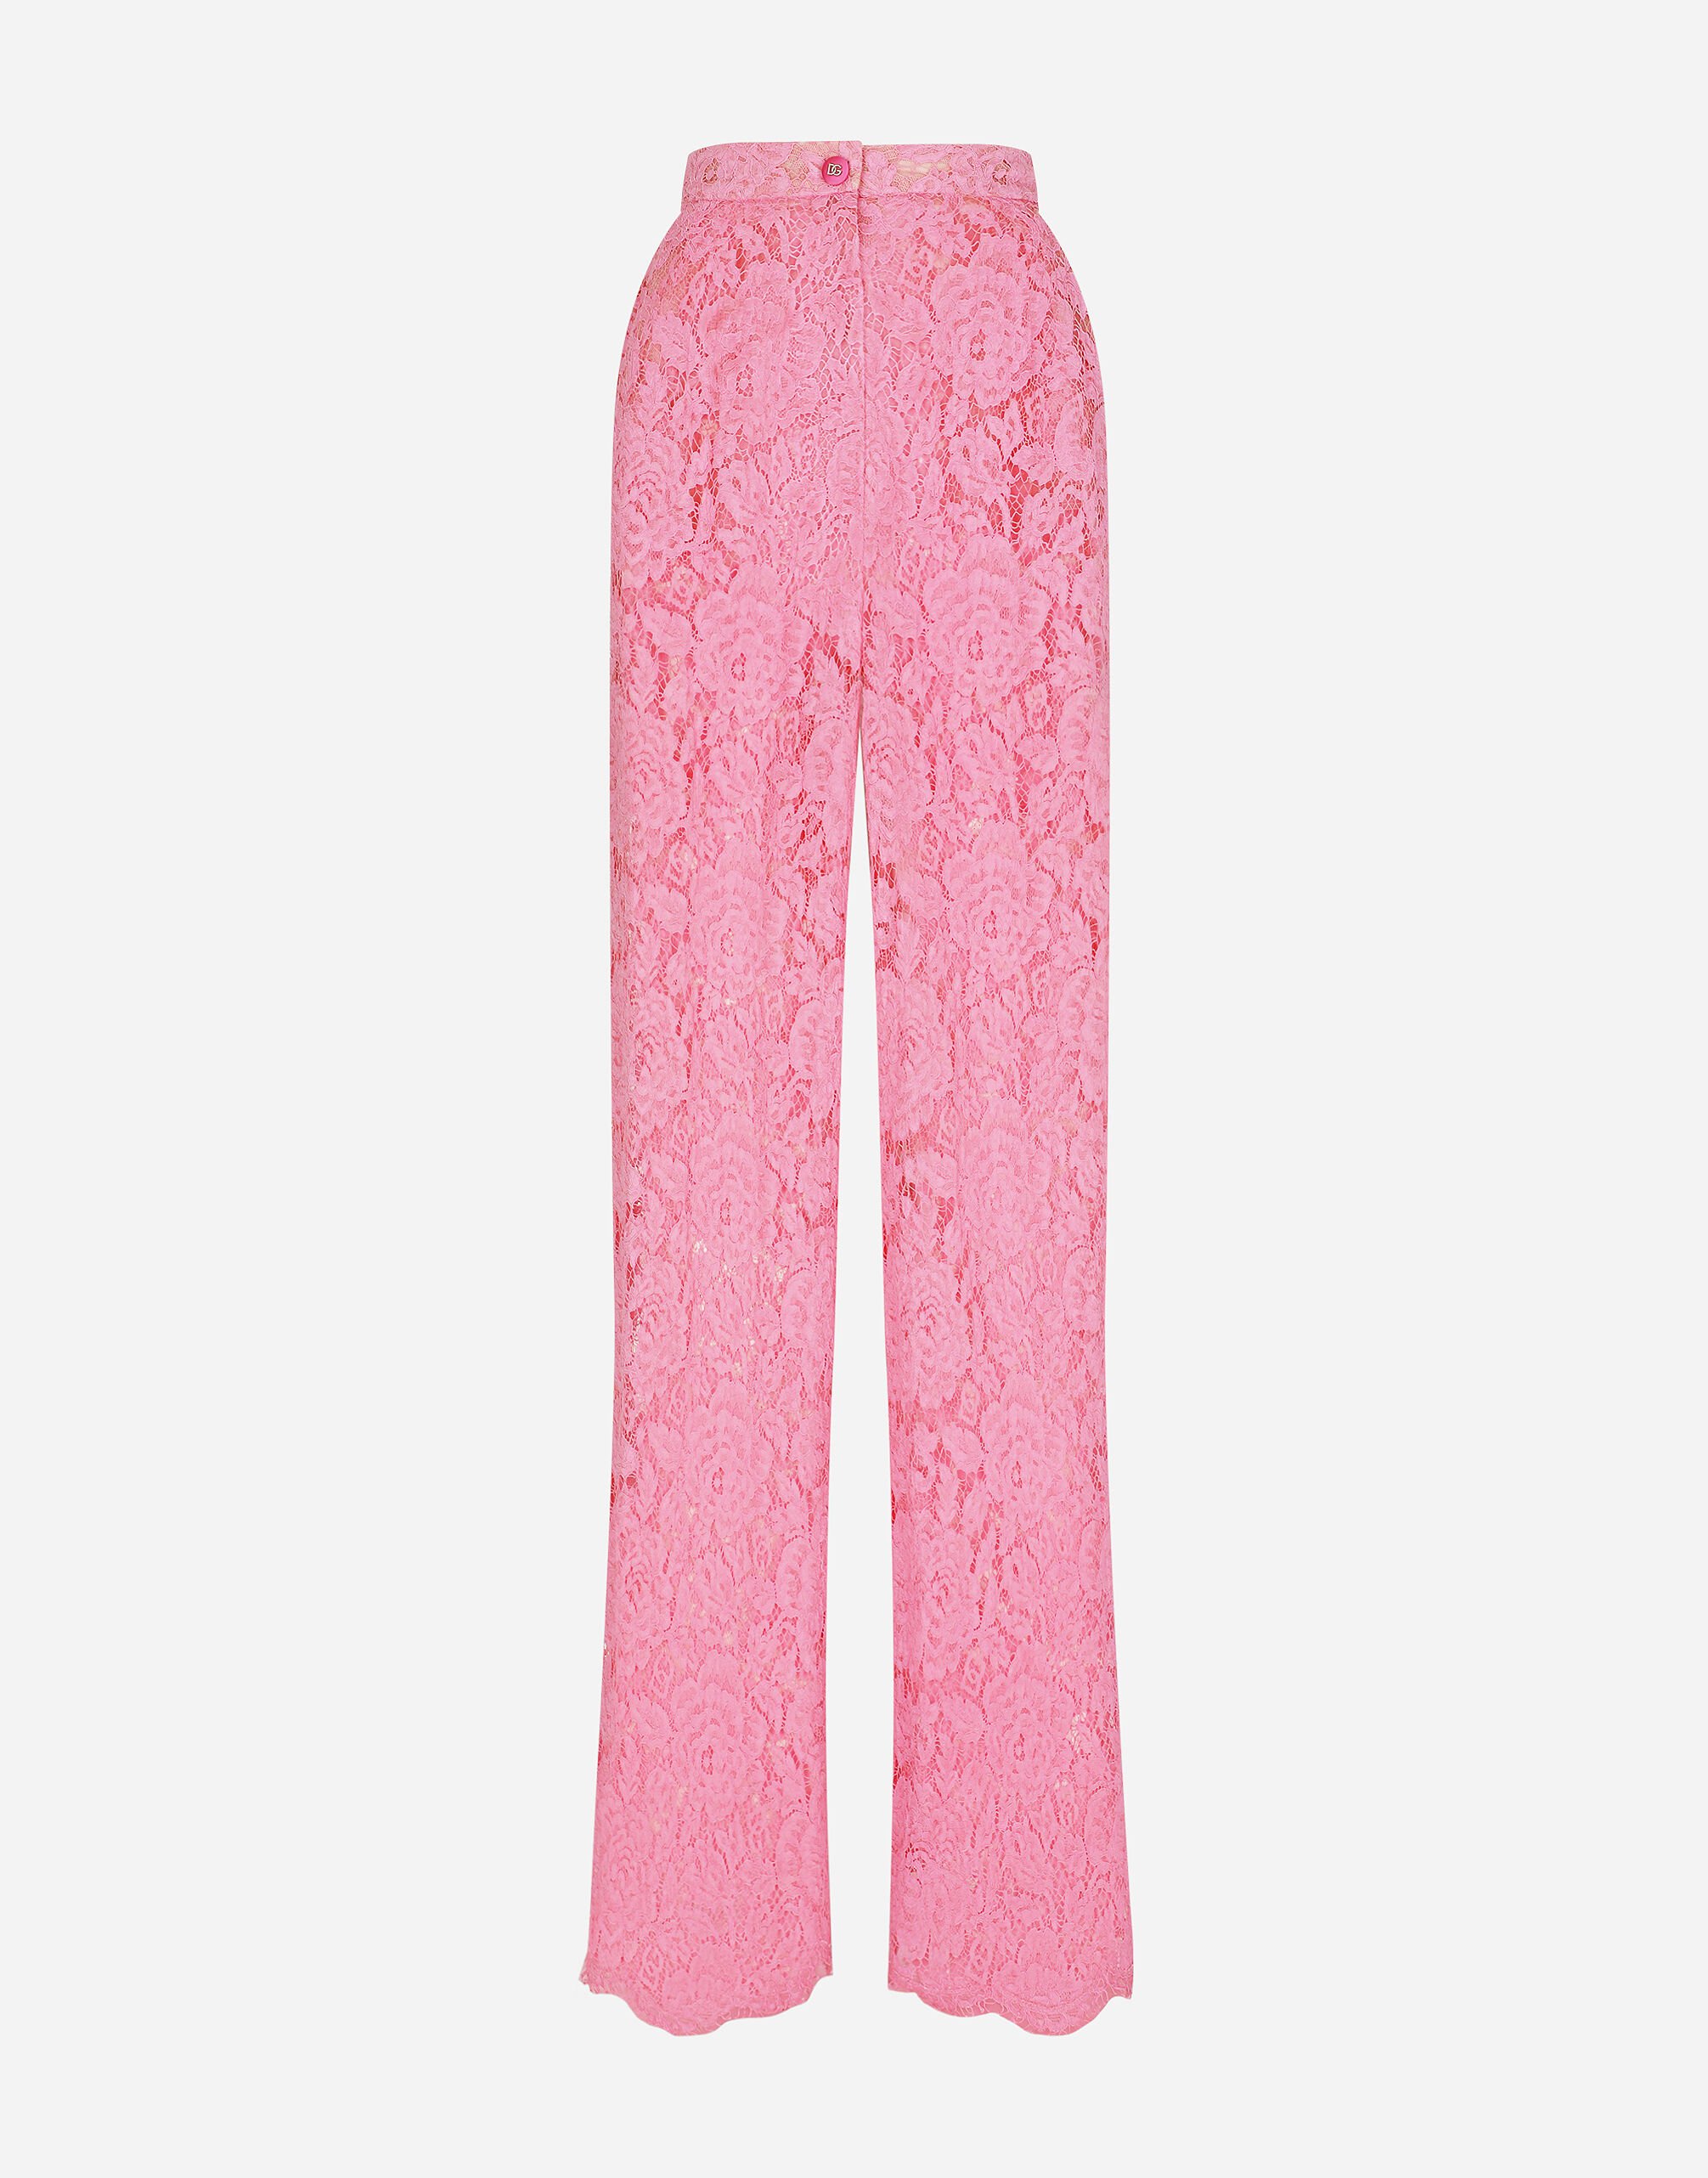 Dolce & Gabbana Flared branded stretch lace pants Pink F79DATFMMHN